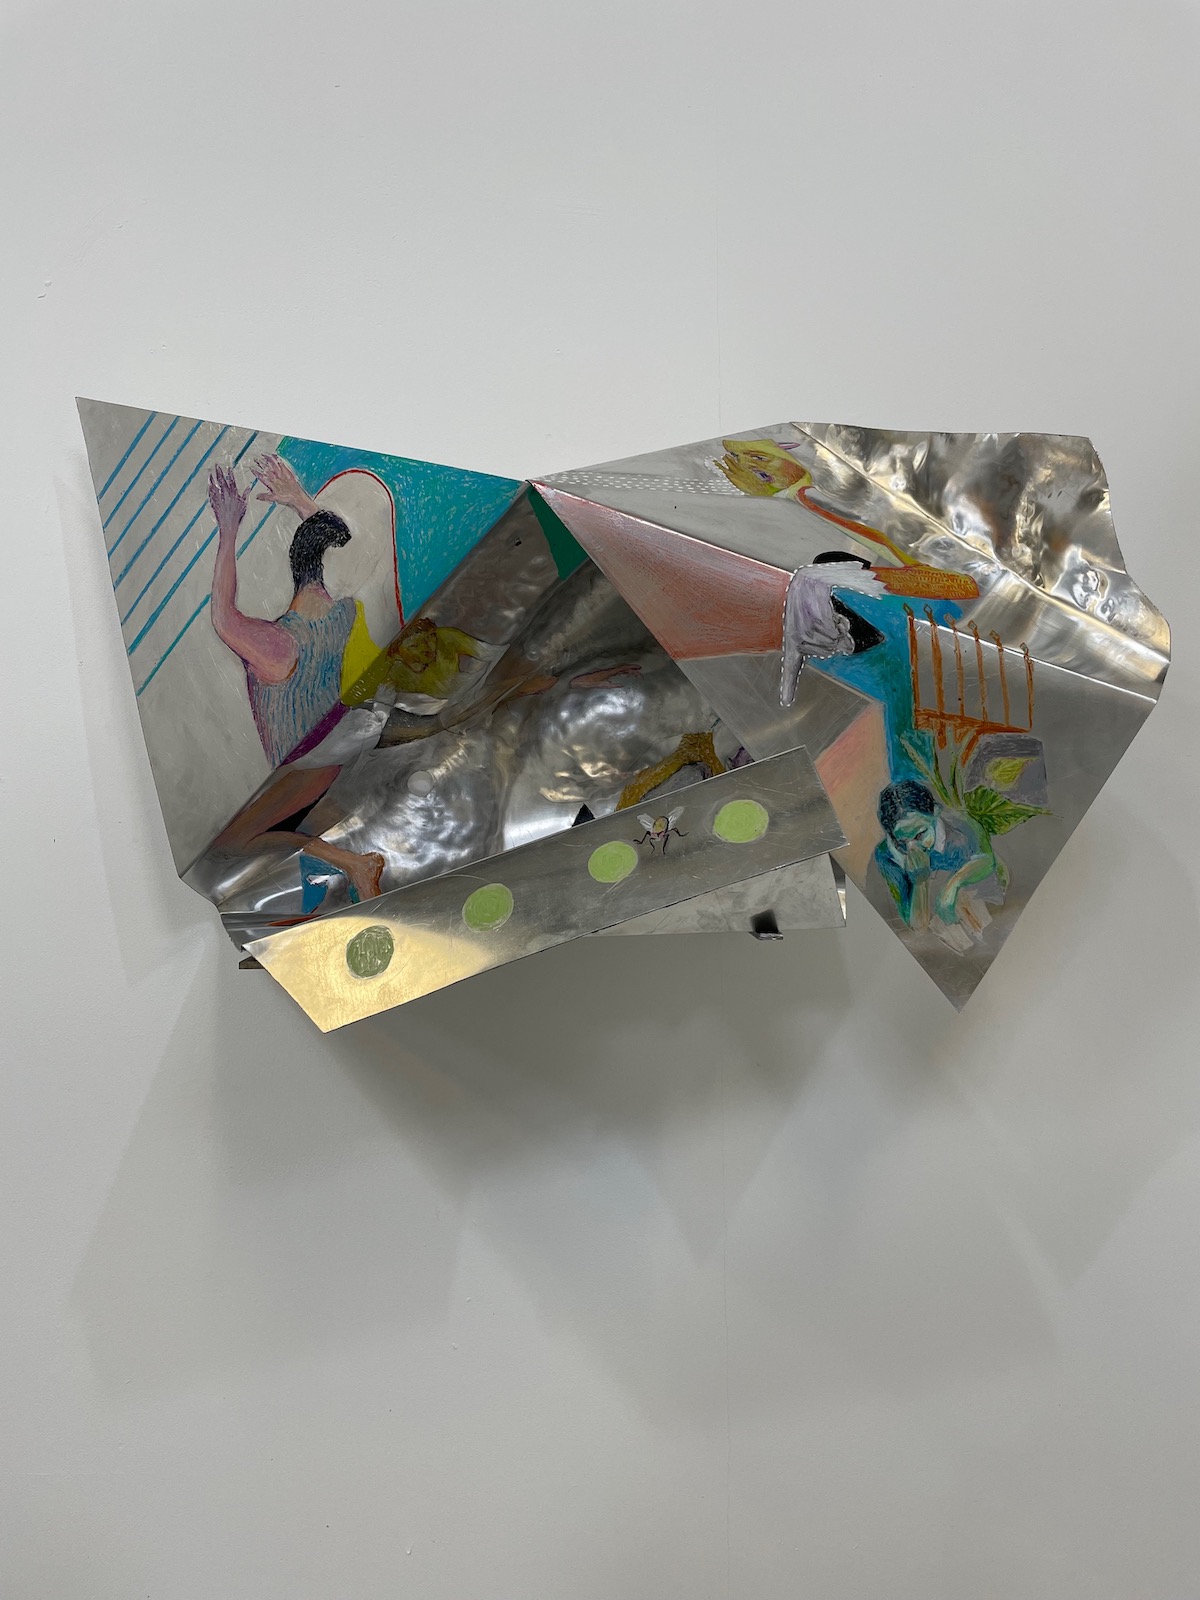  Hand-bent and bashed aluminium sheet sculpture with figurative-abstract drawings in oil pastels — of a game of Hide and Seek (Luka Chhupi). 